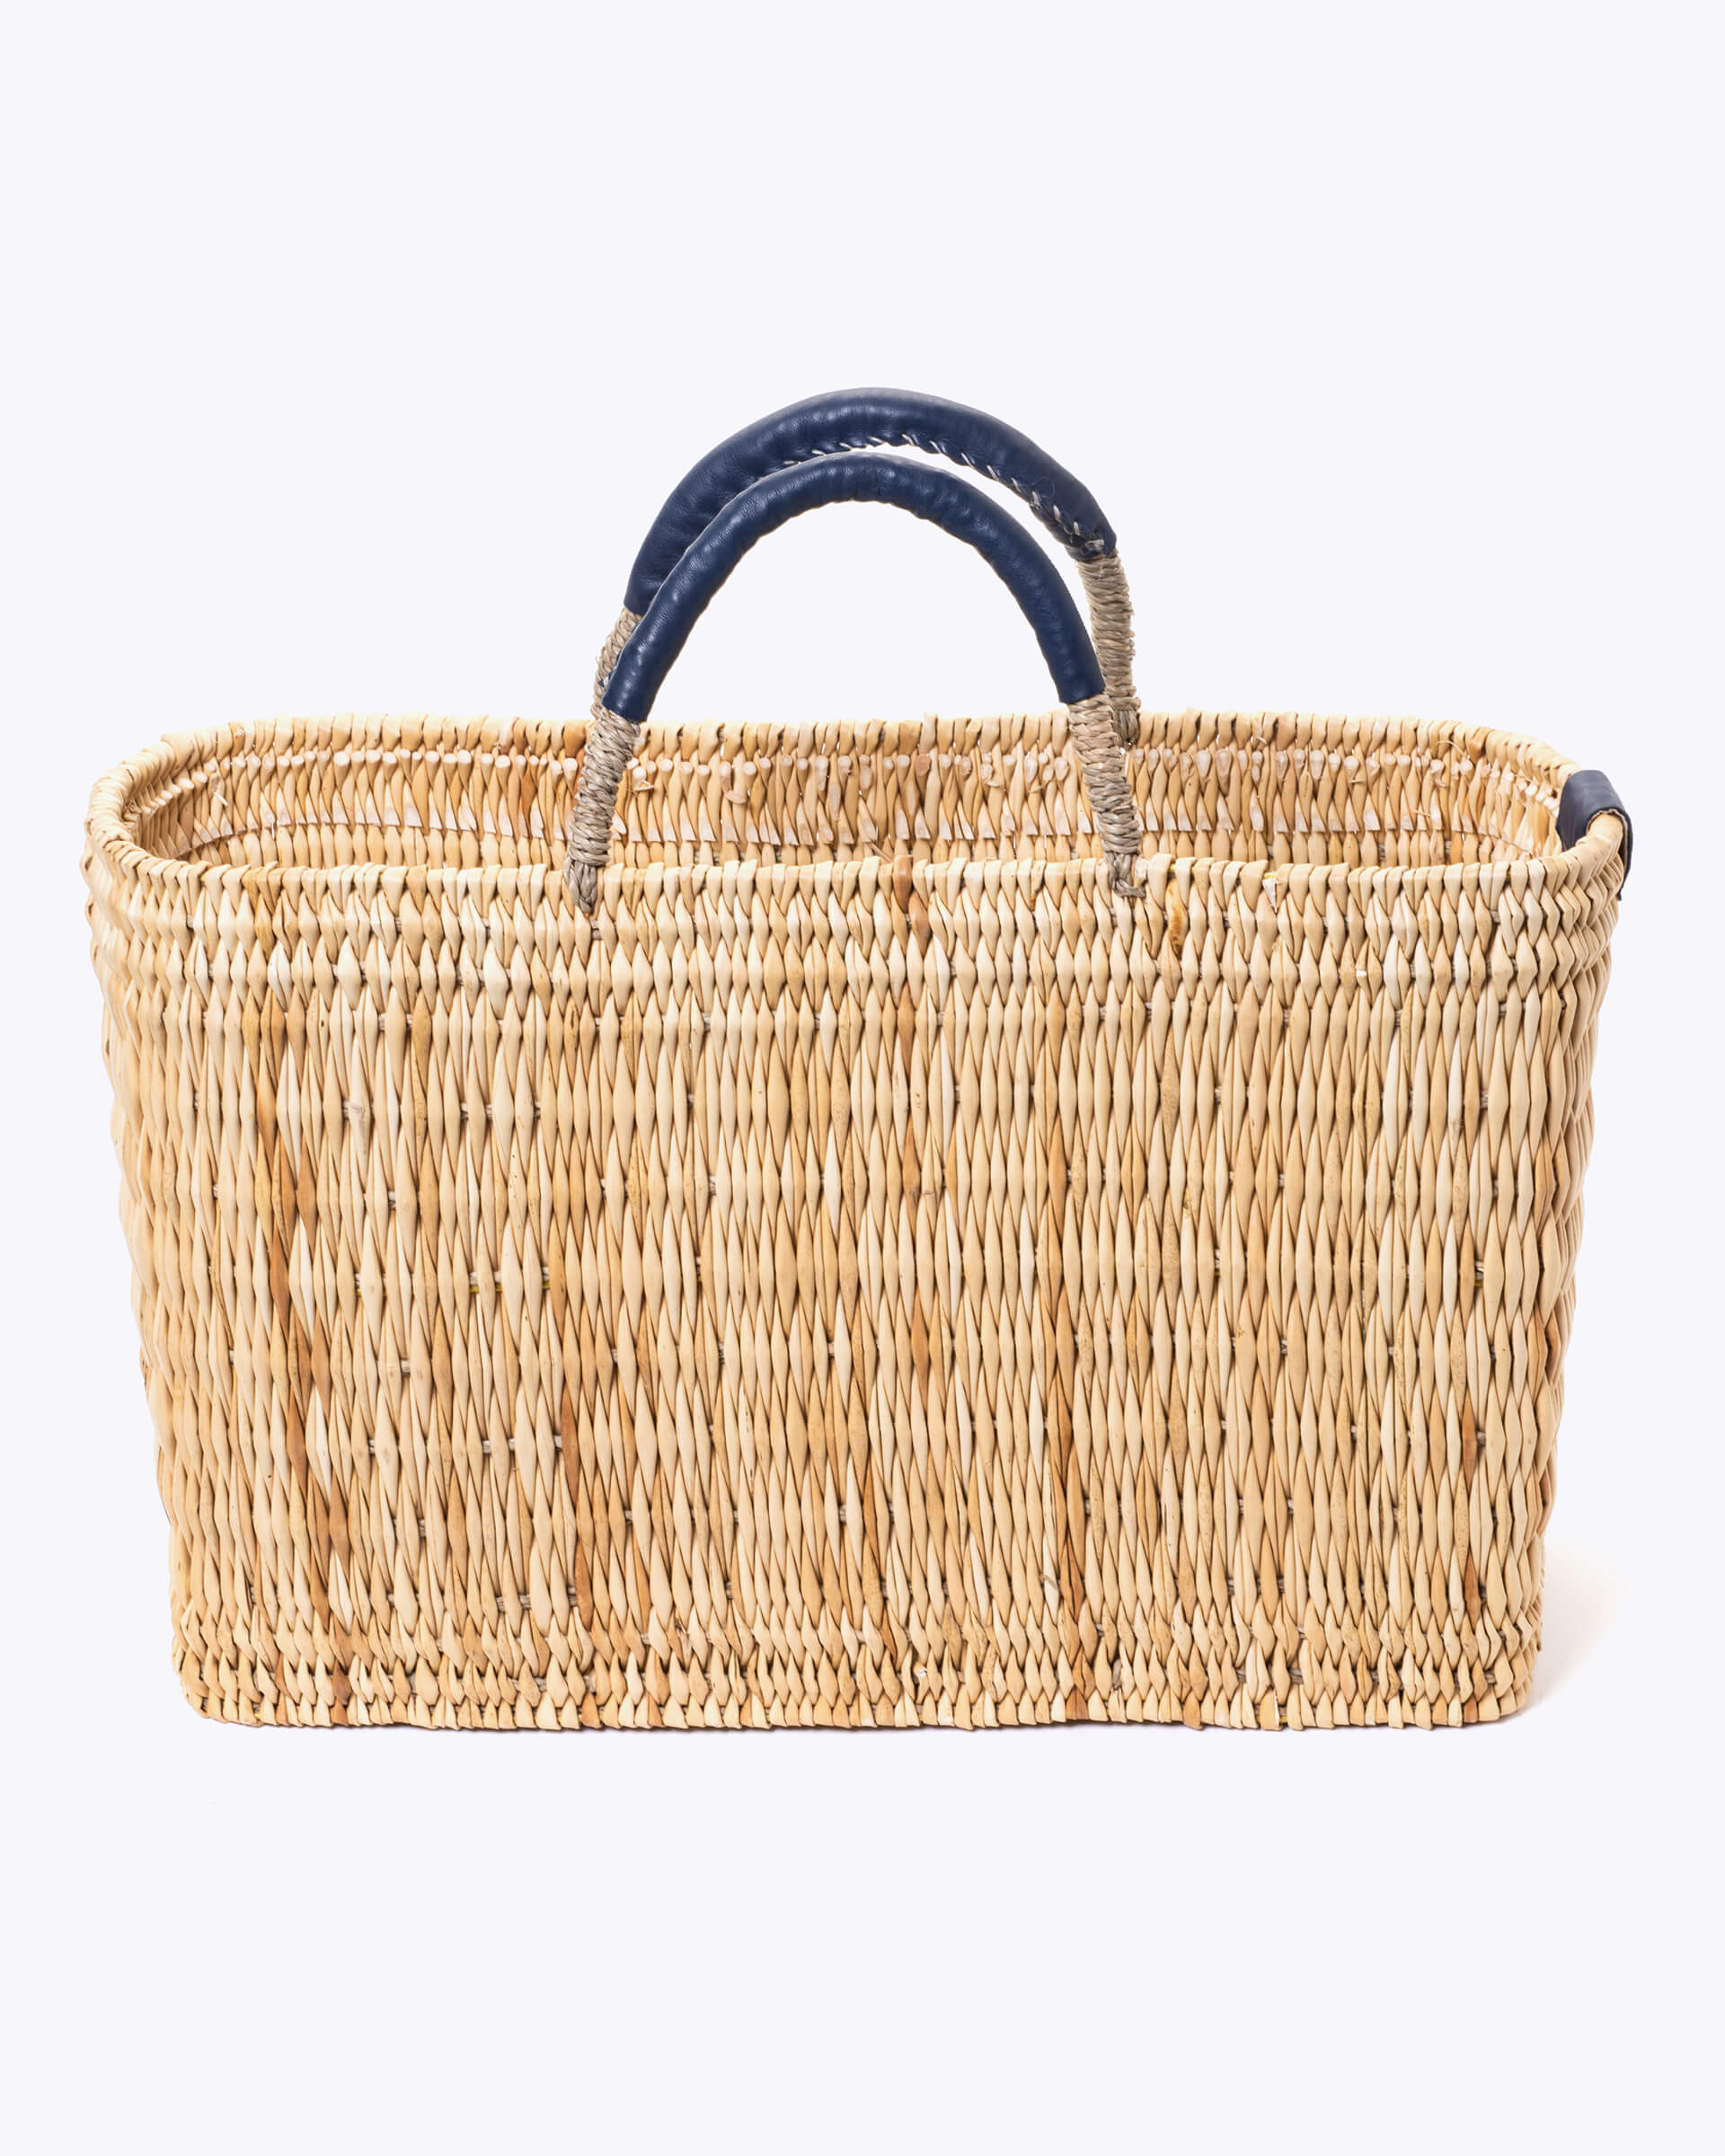 medium straw basket wrapped with dark blue leather handle on a white background